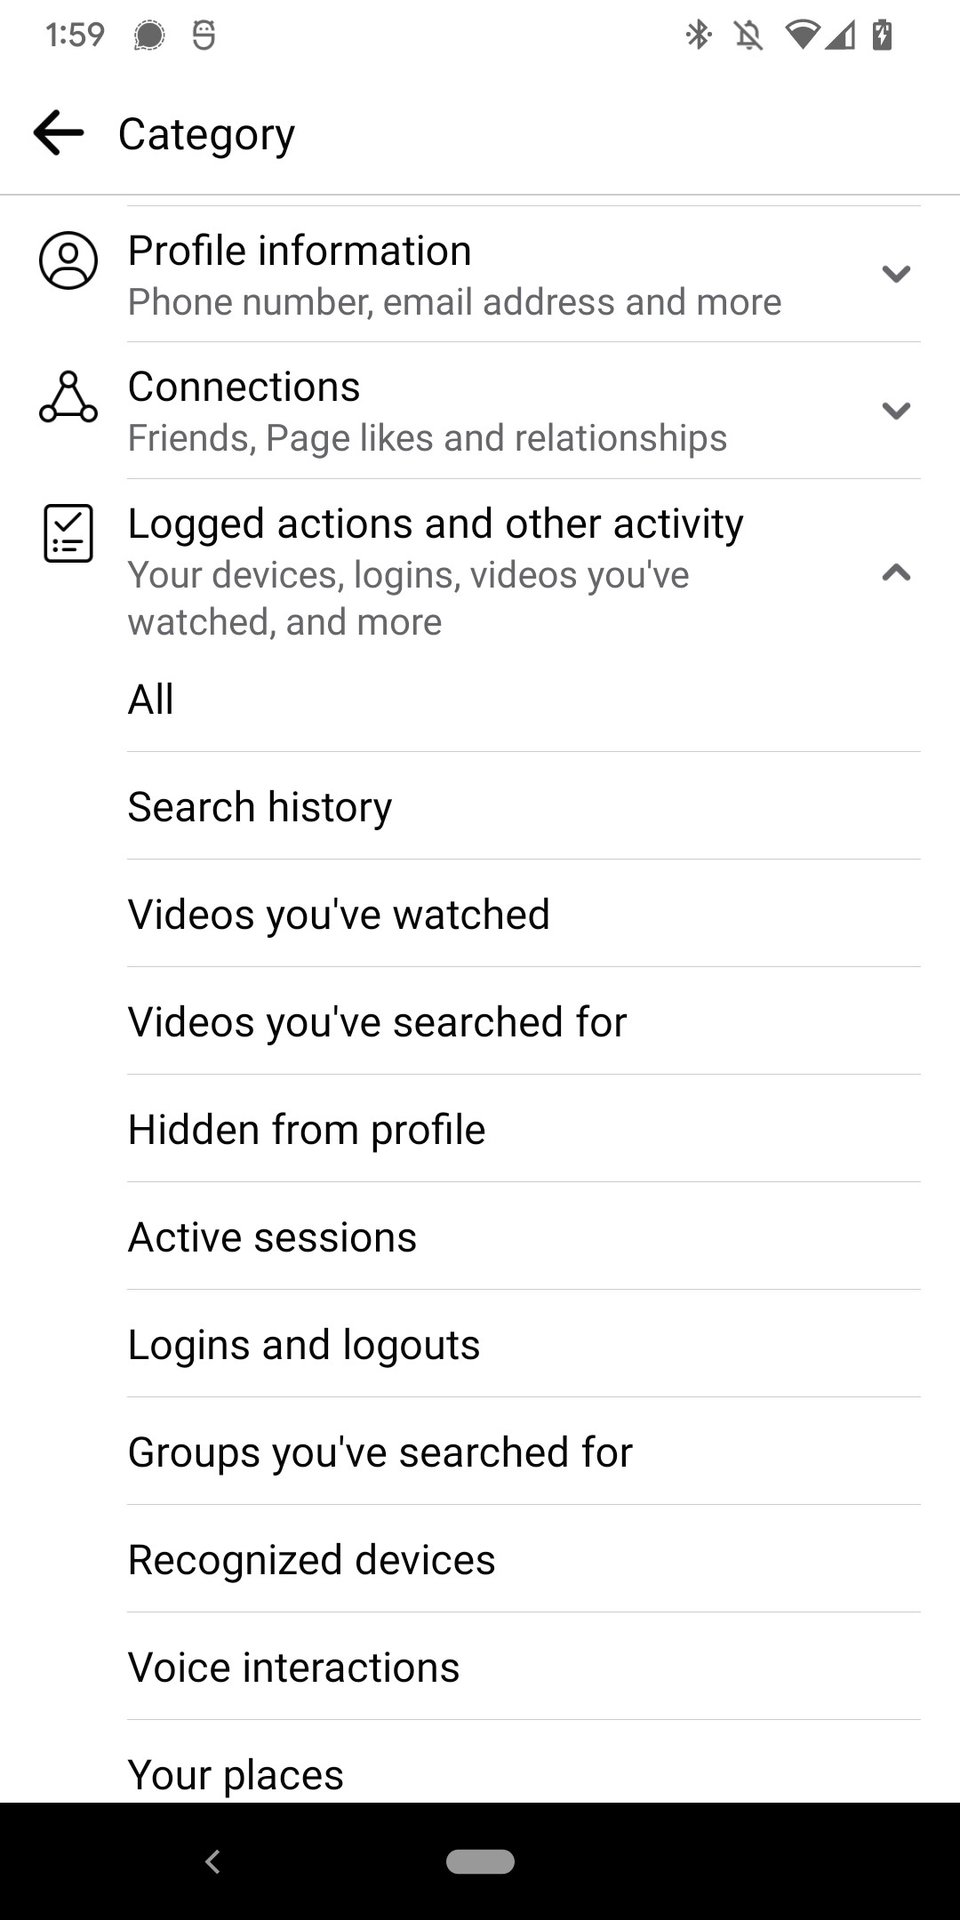 A screenshot of the Facebook mobile app showing the Settings menu showing the Logged actions and other activity options including "Hidden from profile."